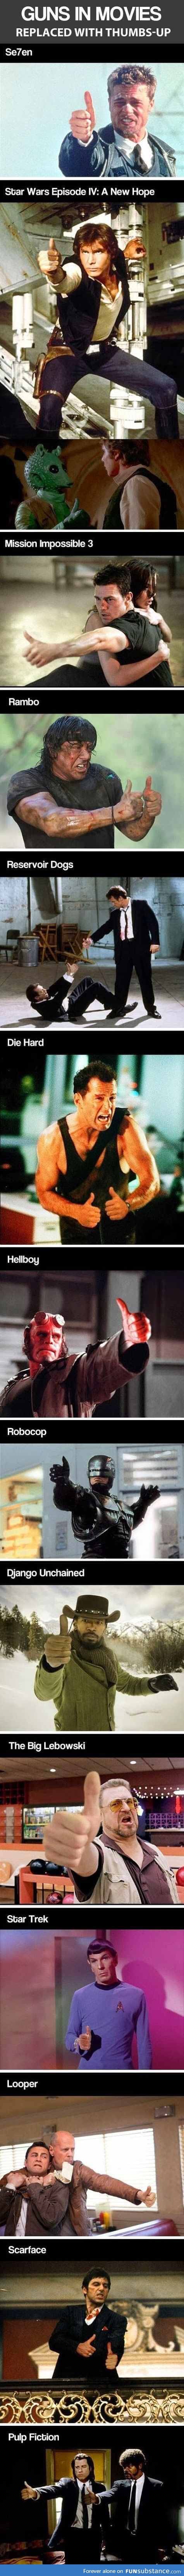 Guns replaced with thumbs up in movies